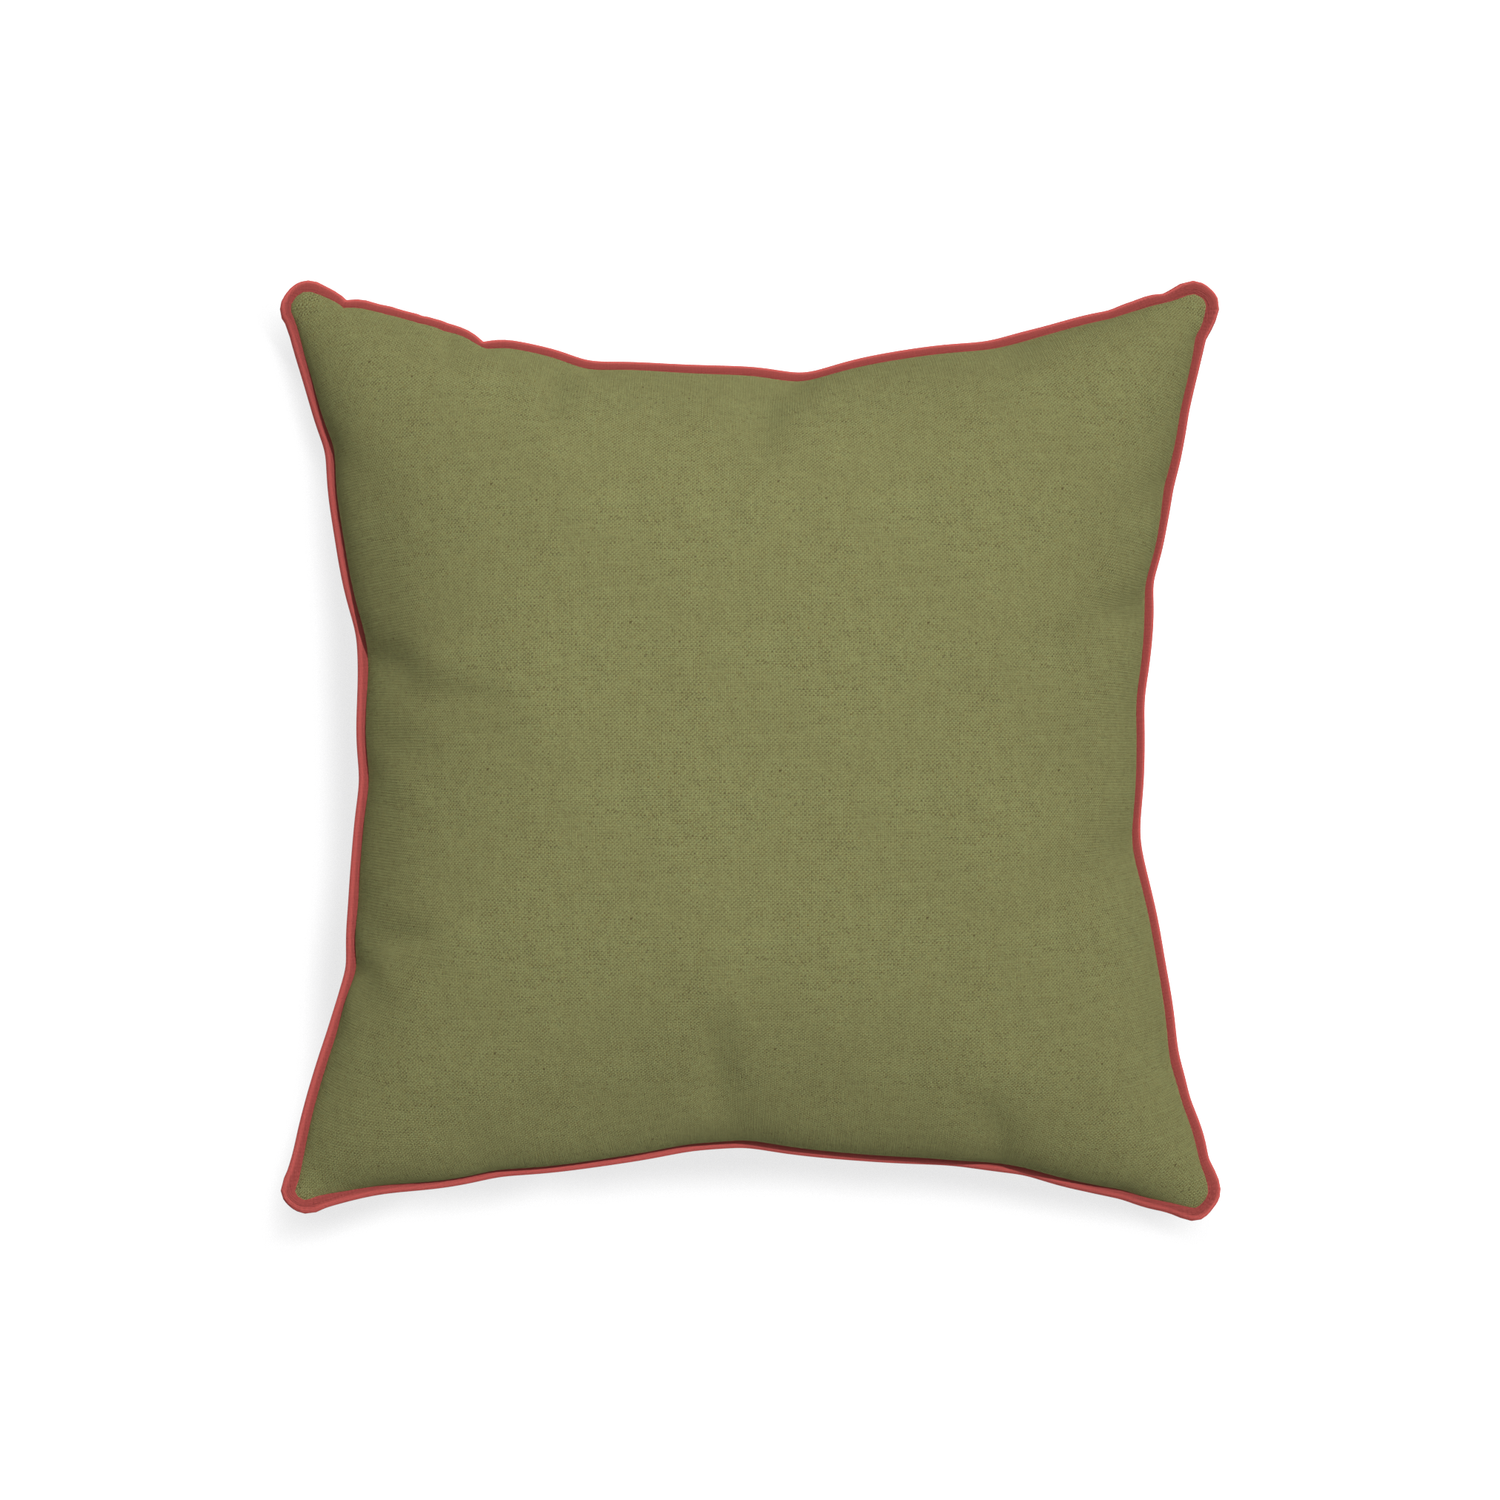 20-square moss custom moss greenpillow with c piping on white background